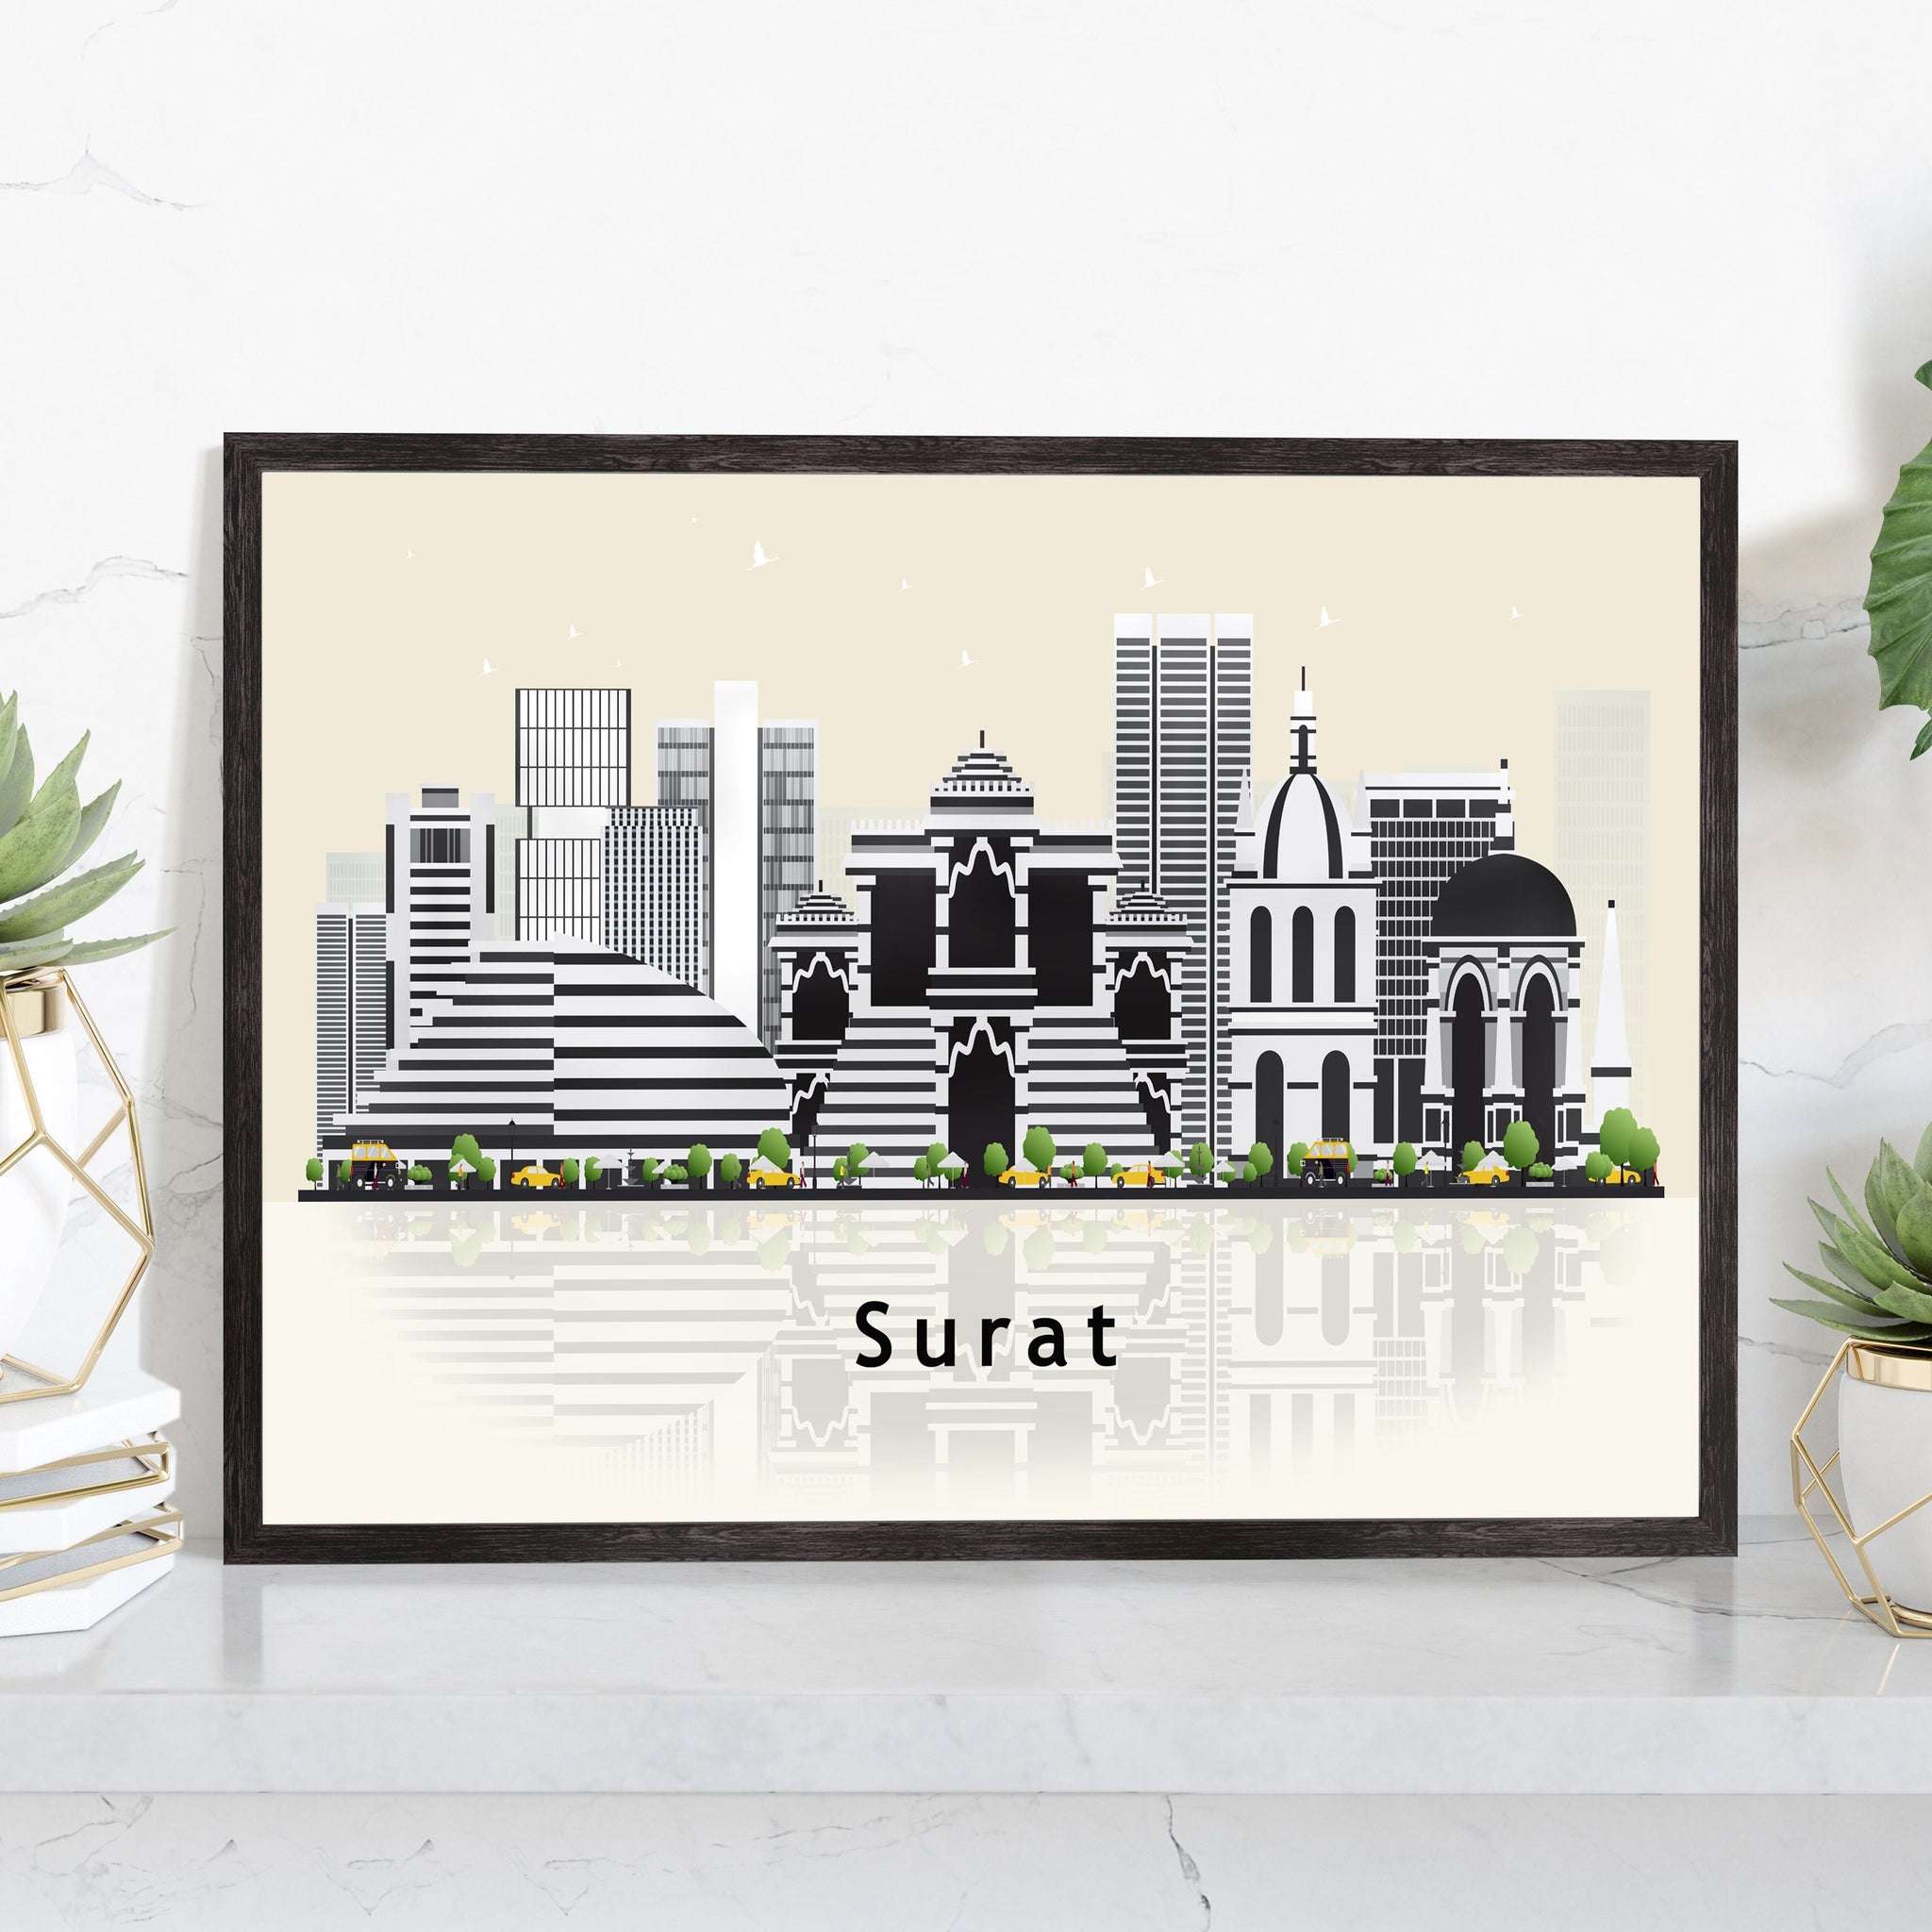 SURAT INDIA Illustration skyline poster, Modern skyline cityscape poster, India city skyline landmark map poster, Home wall decoration